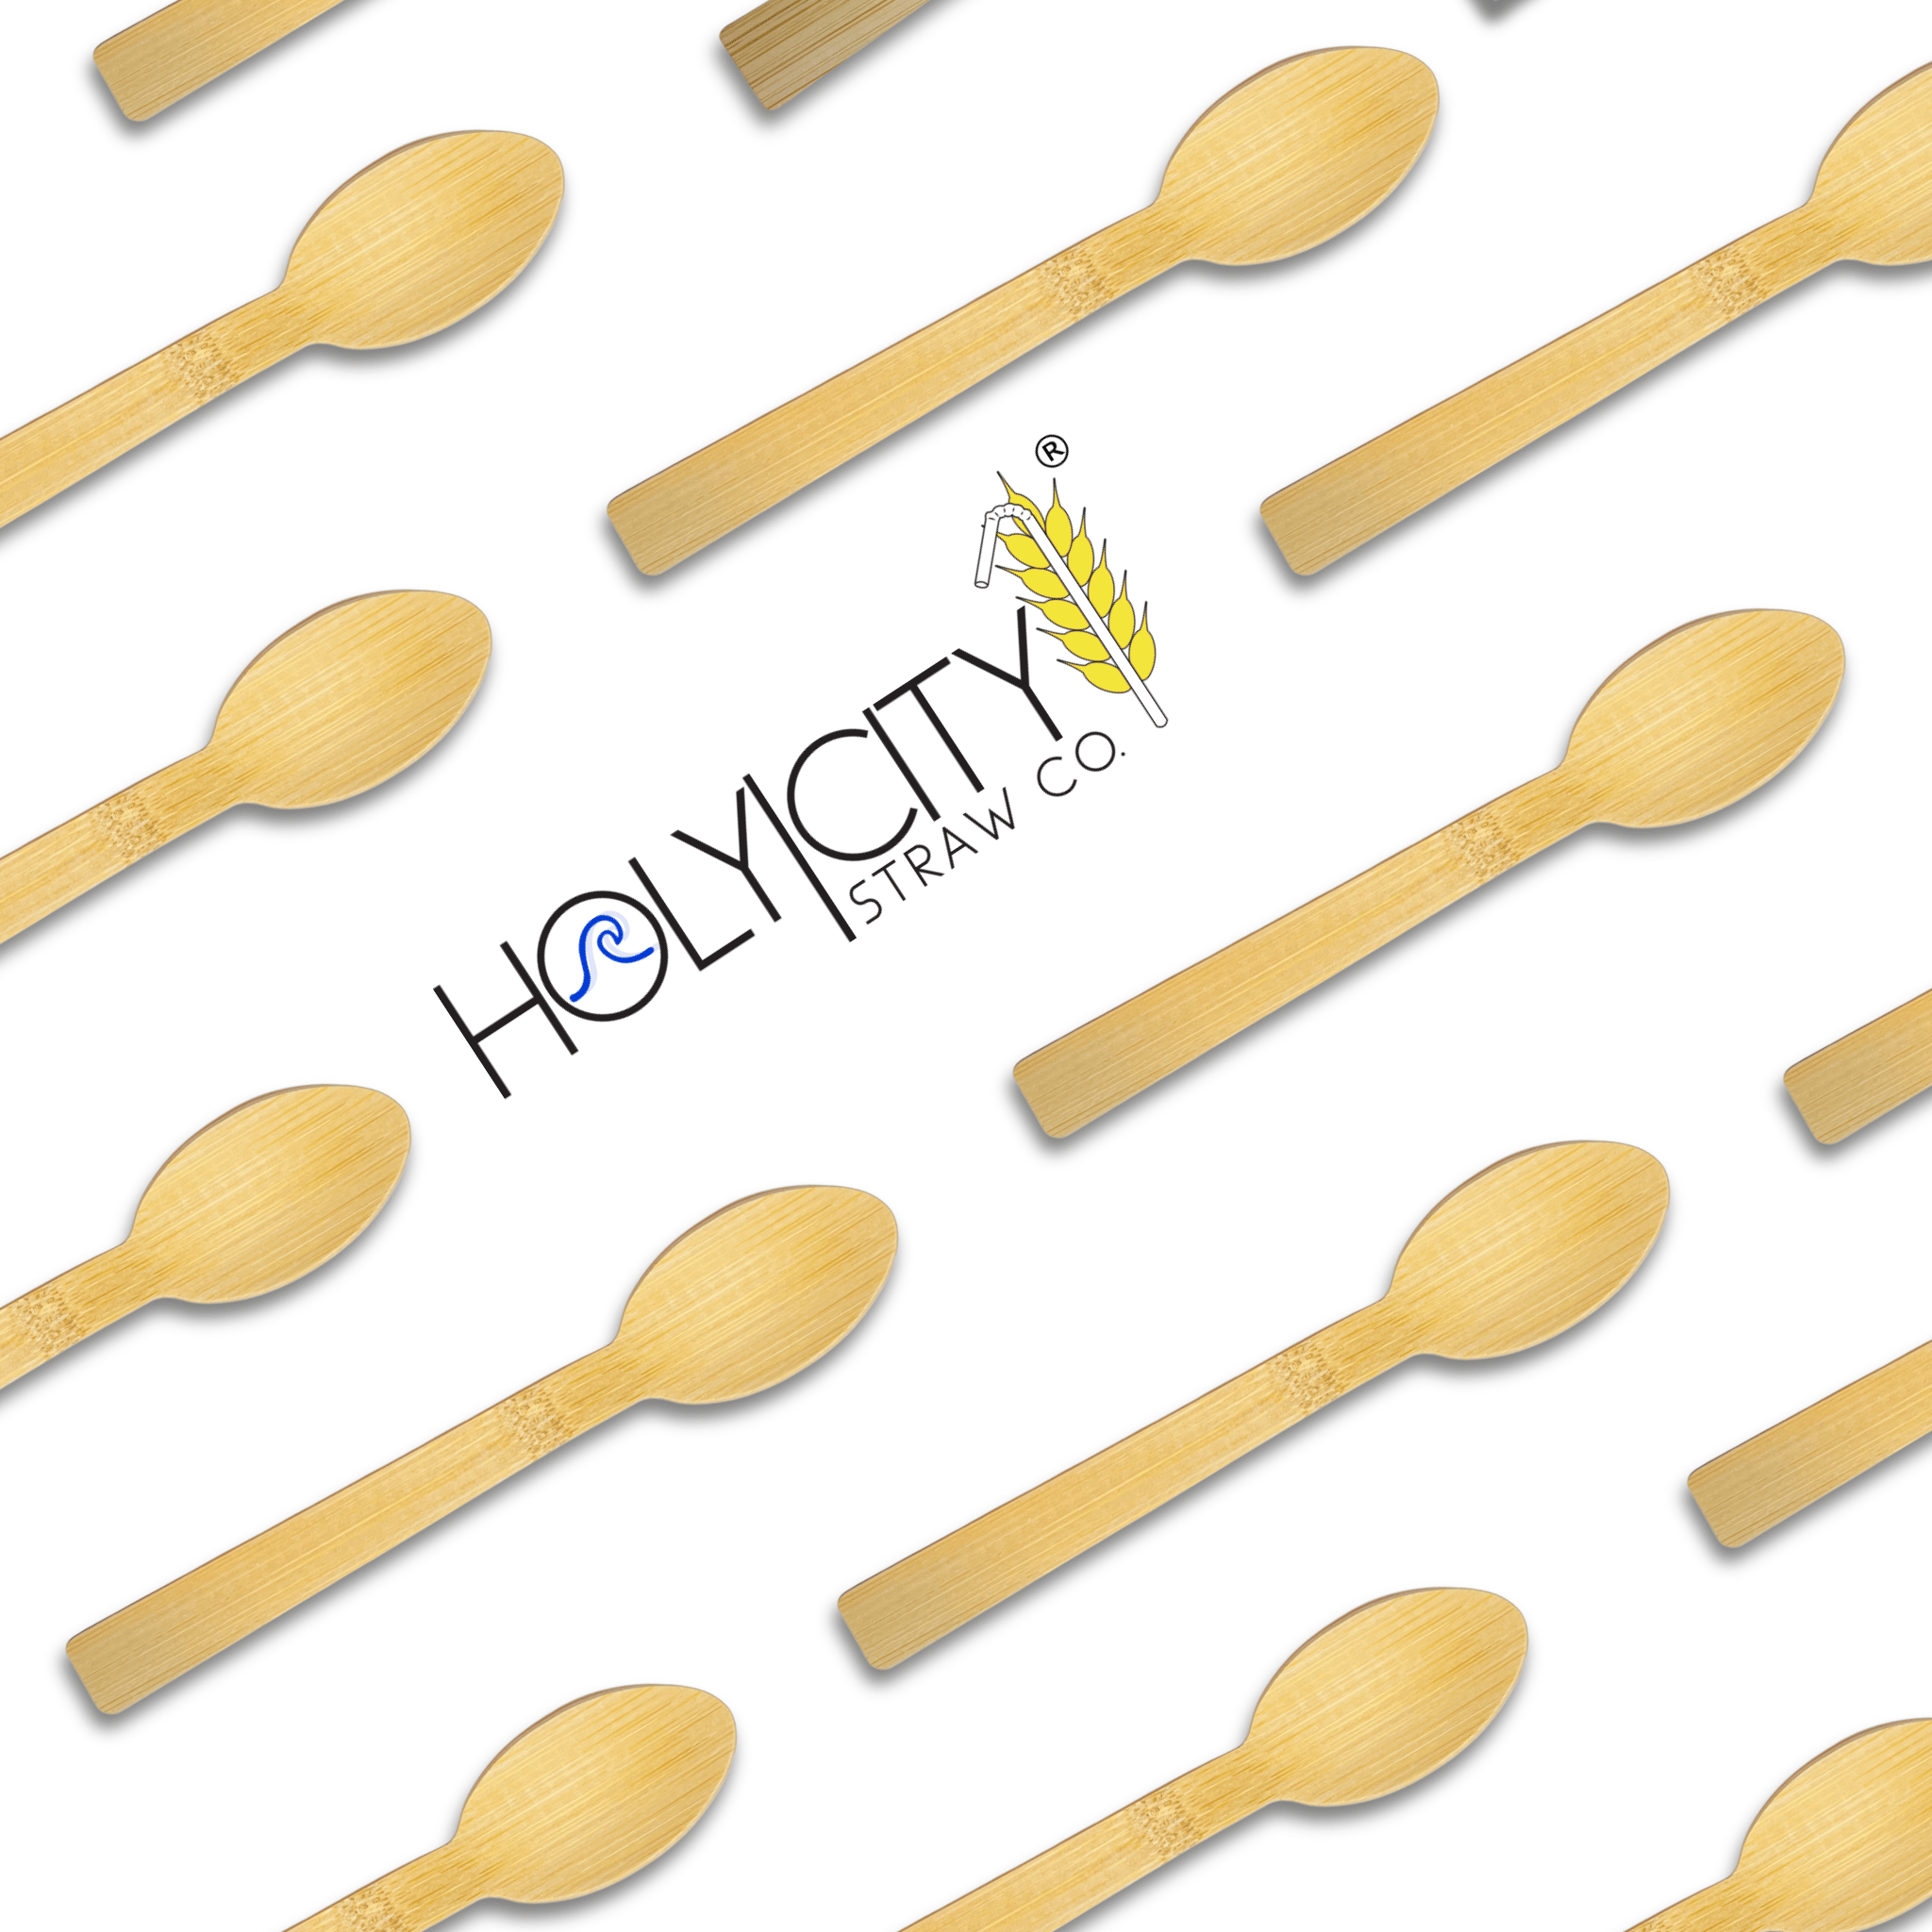 Holy City Straw Company wrapped bamboo spoons lined up on angle